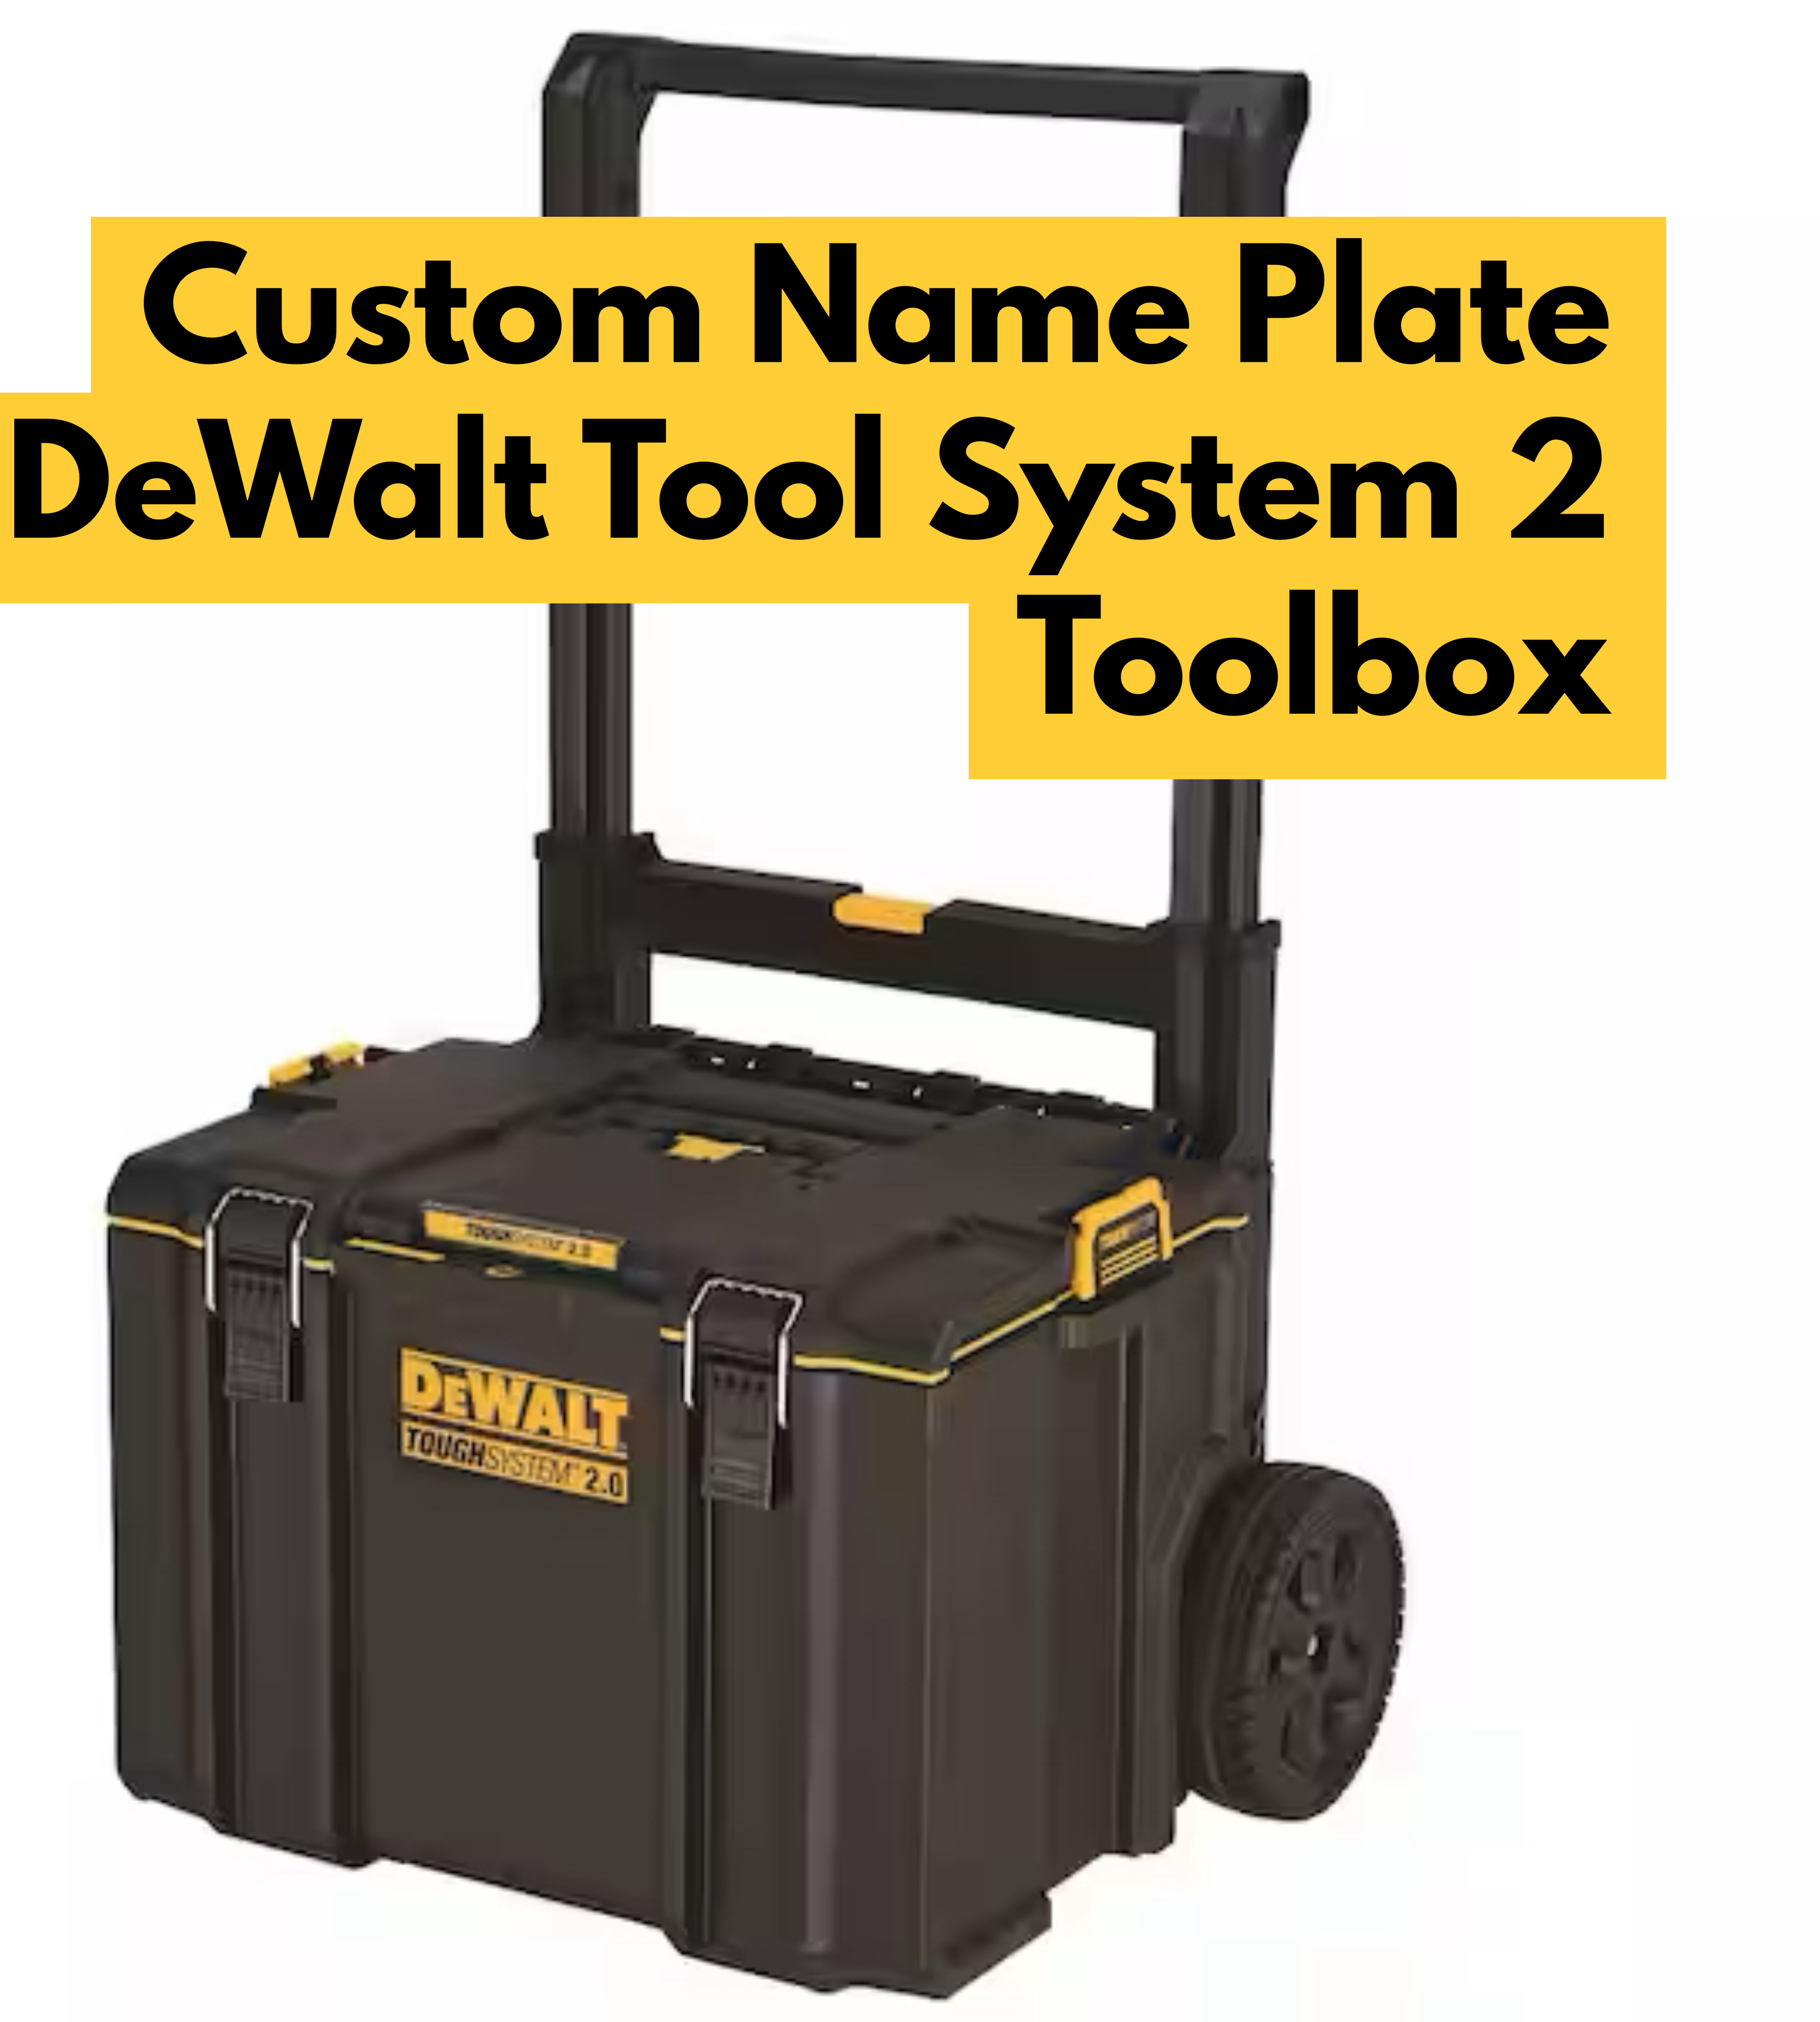 Custom Name Plate for Your DeWalt ToolSystem 2 Tool Boxes